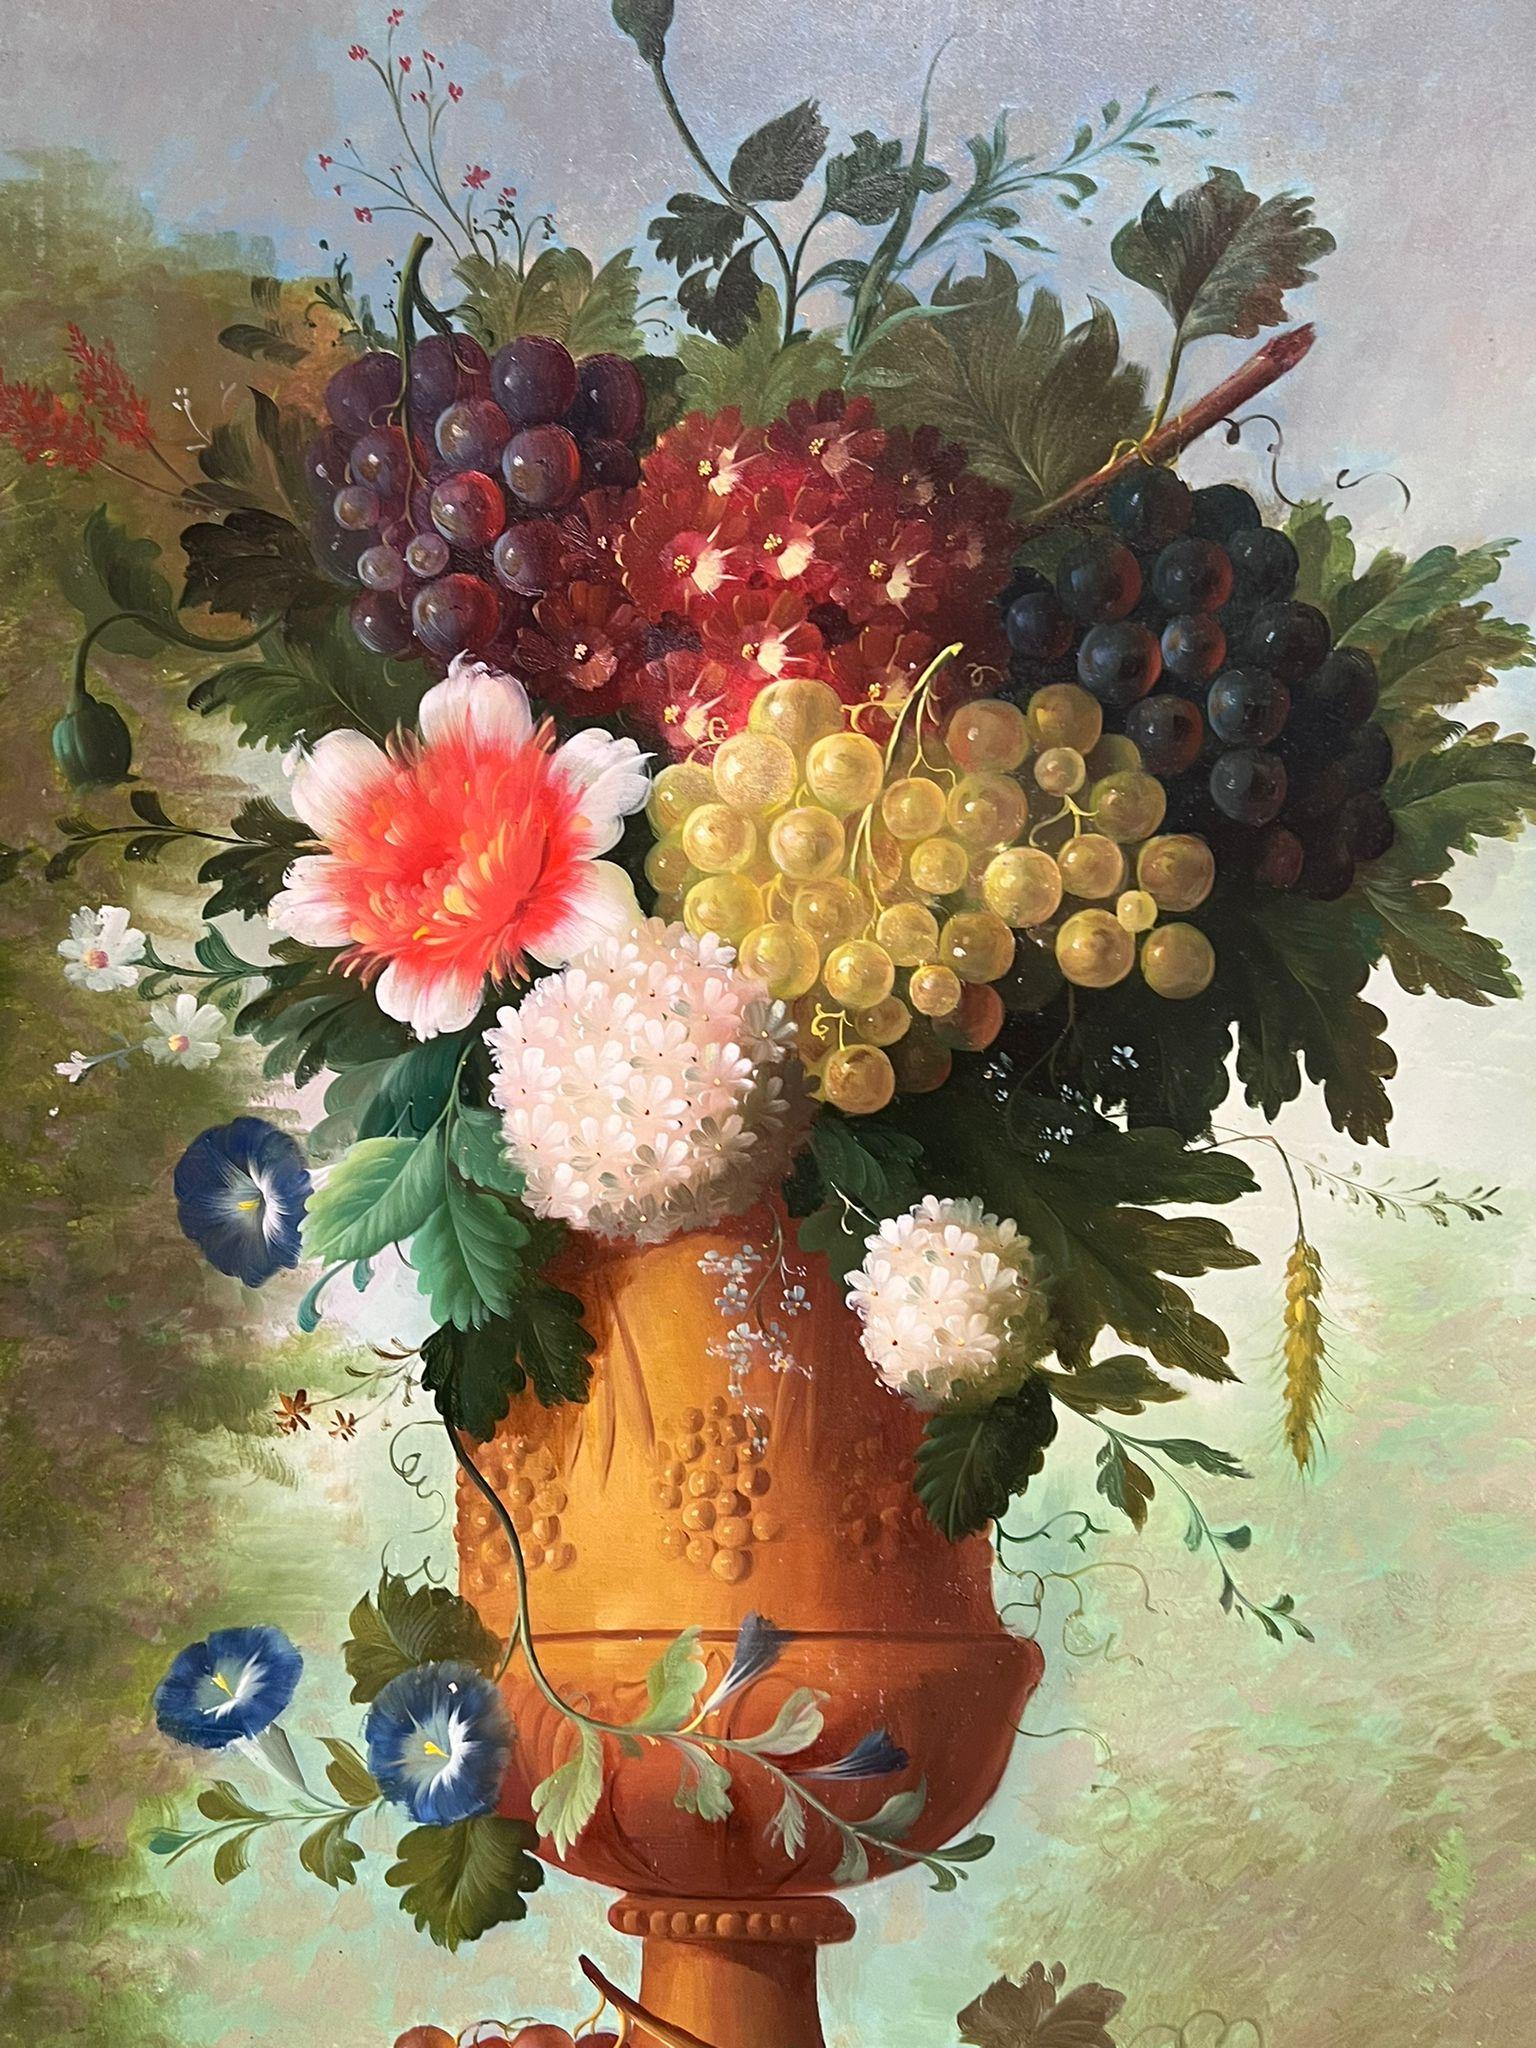 Profusion of Flowers
by Thomas Webster, British contemporary artist, 
late 20th century
signed oil on board, unframed
board: 30 x 18 inches
provenance: private collection, UK
condition: some minor surface scuffs but overall good and sound condition 